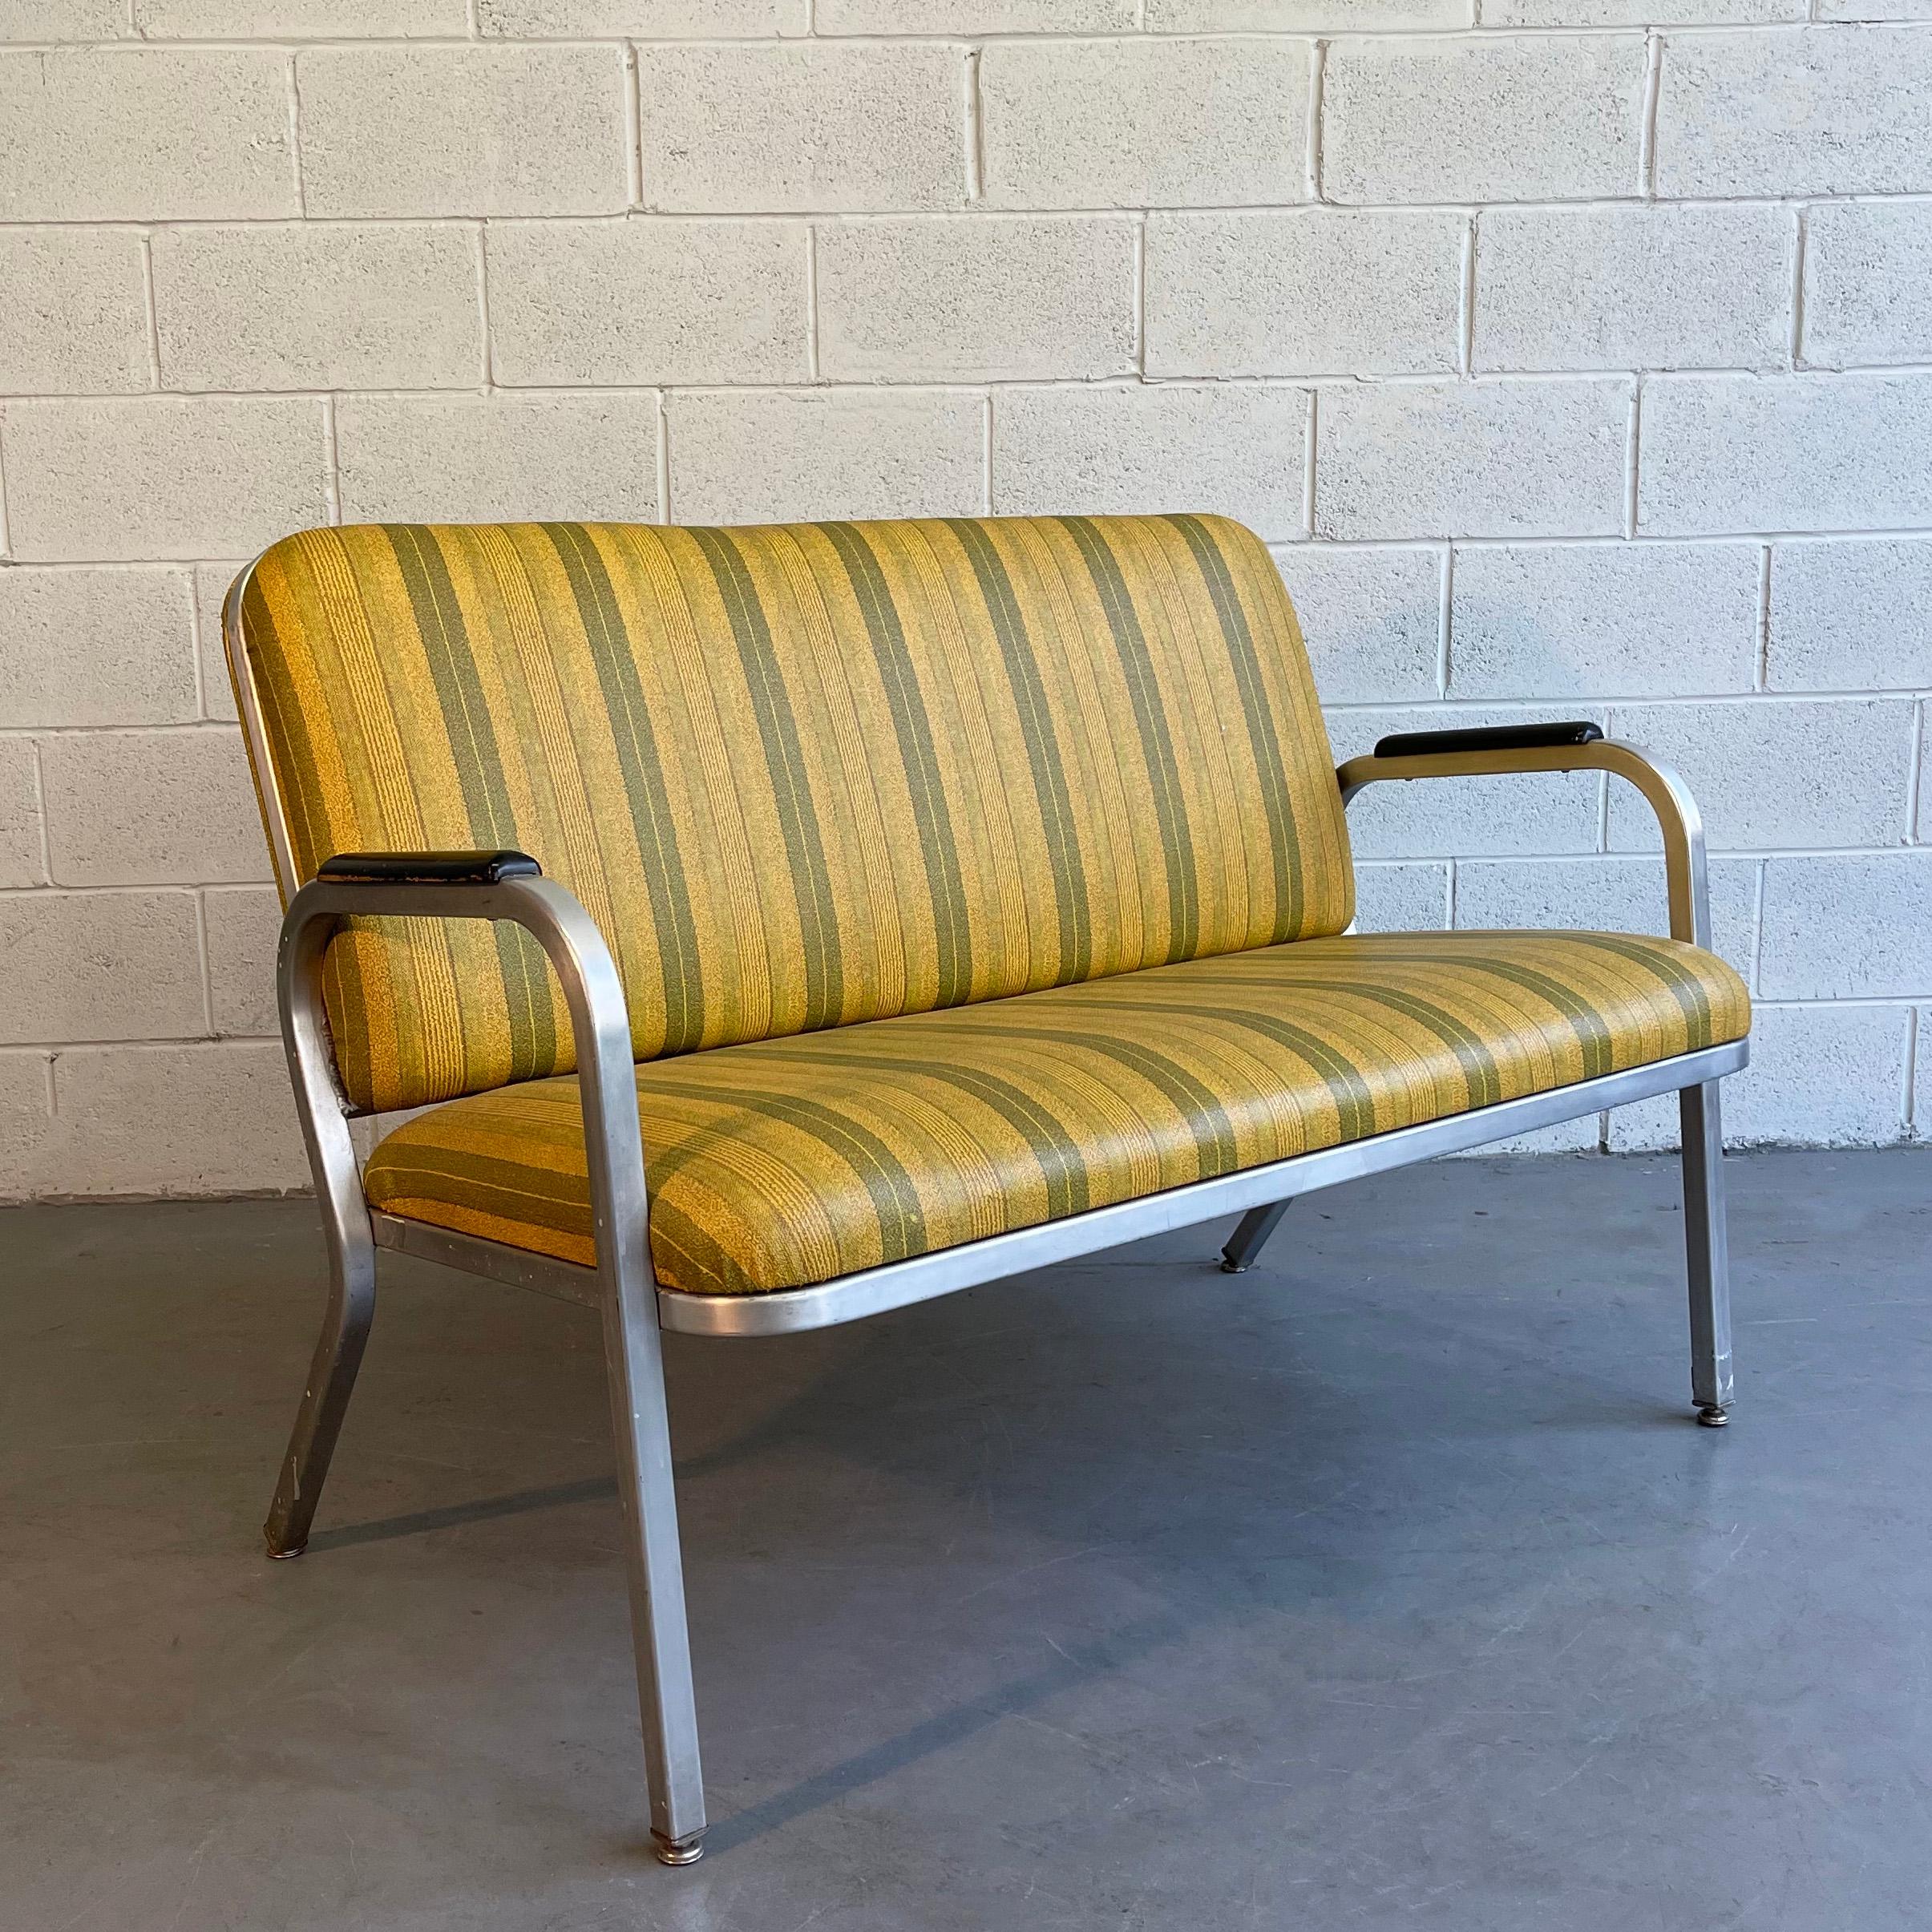 Midcentury, machine-age loveseat sofa by GoodForm, The General Fireproofing Co. features a streamlined aluminum frame with striped vinyl upholstery and painted wood armrests.